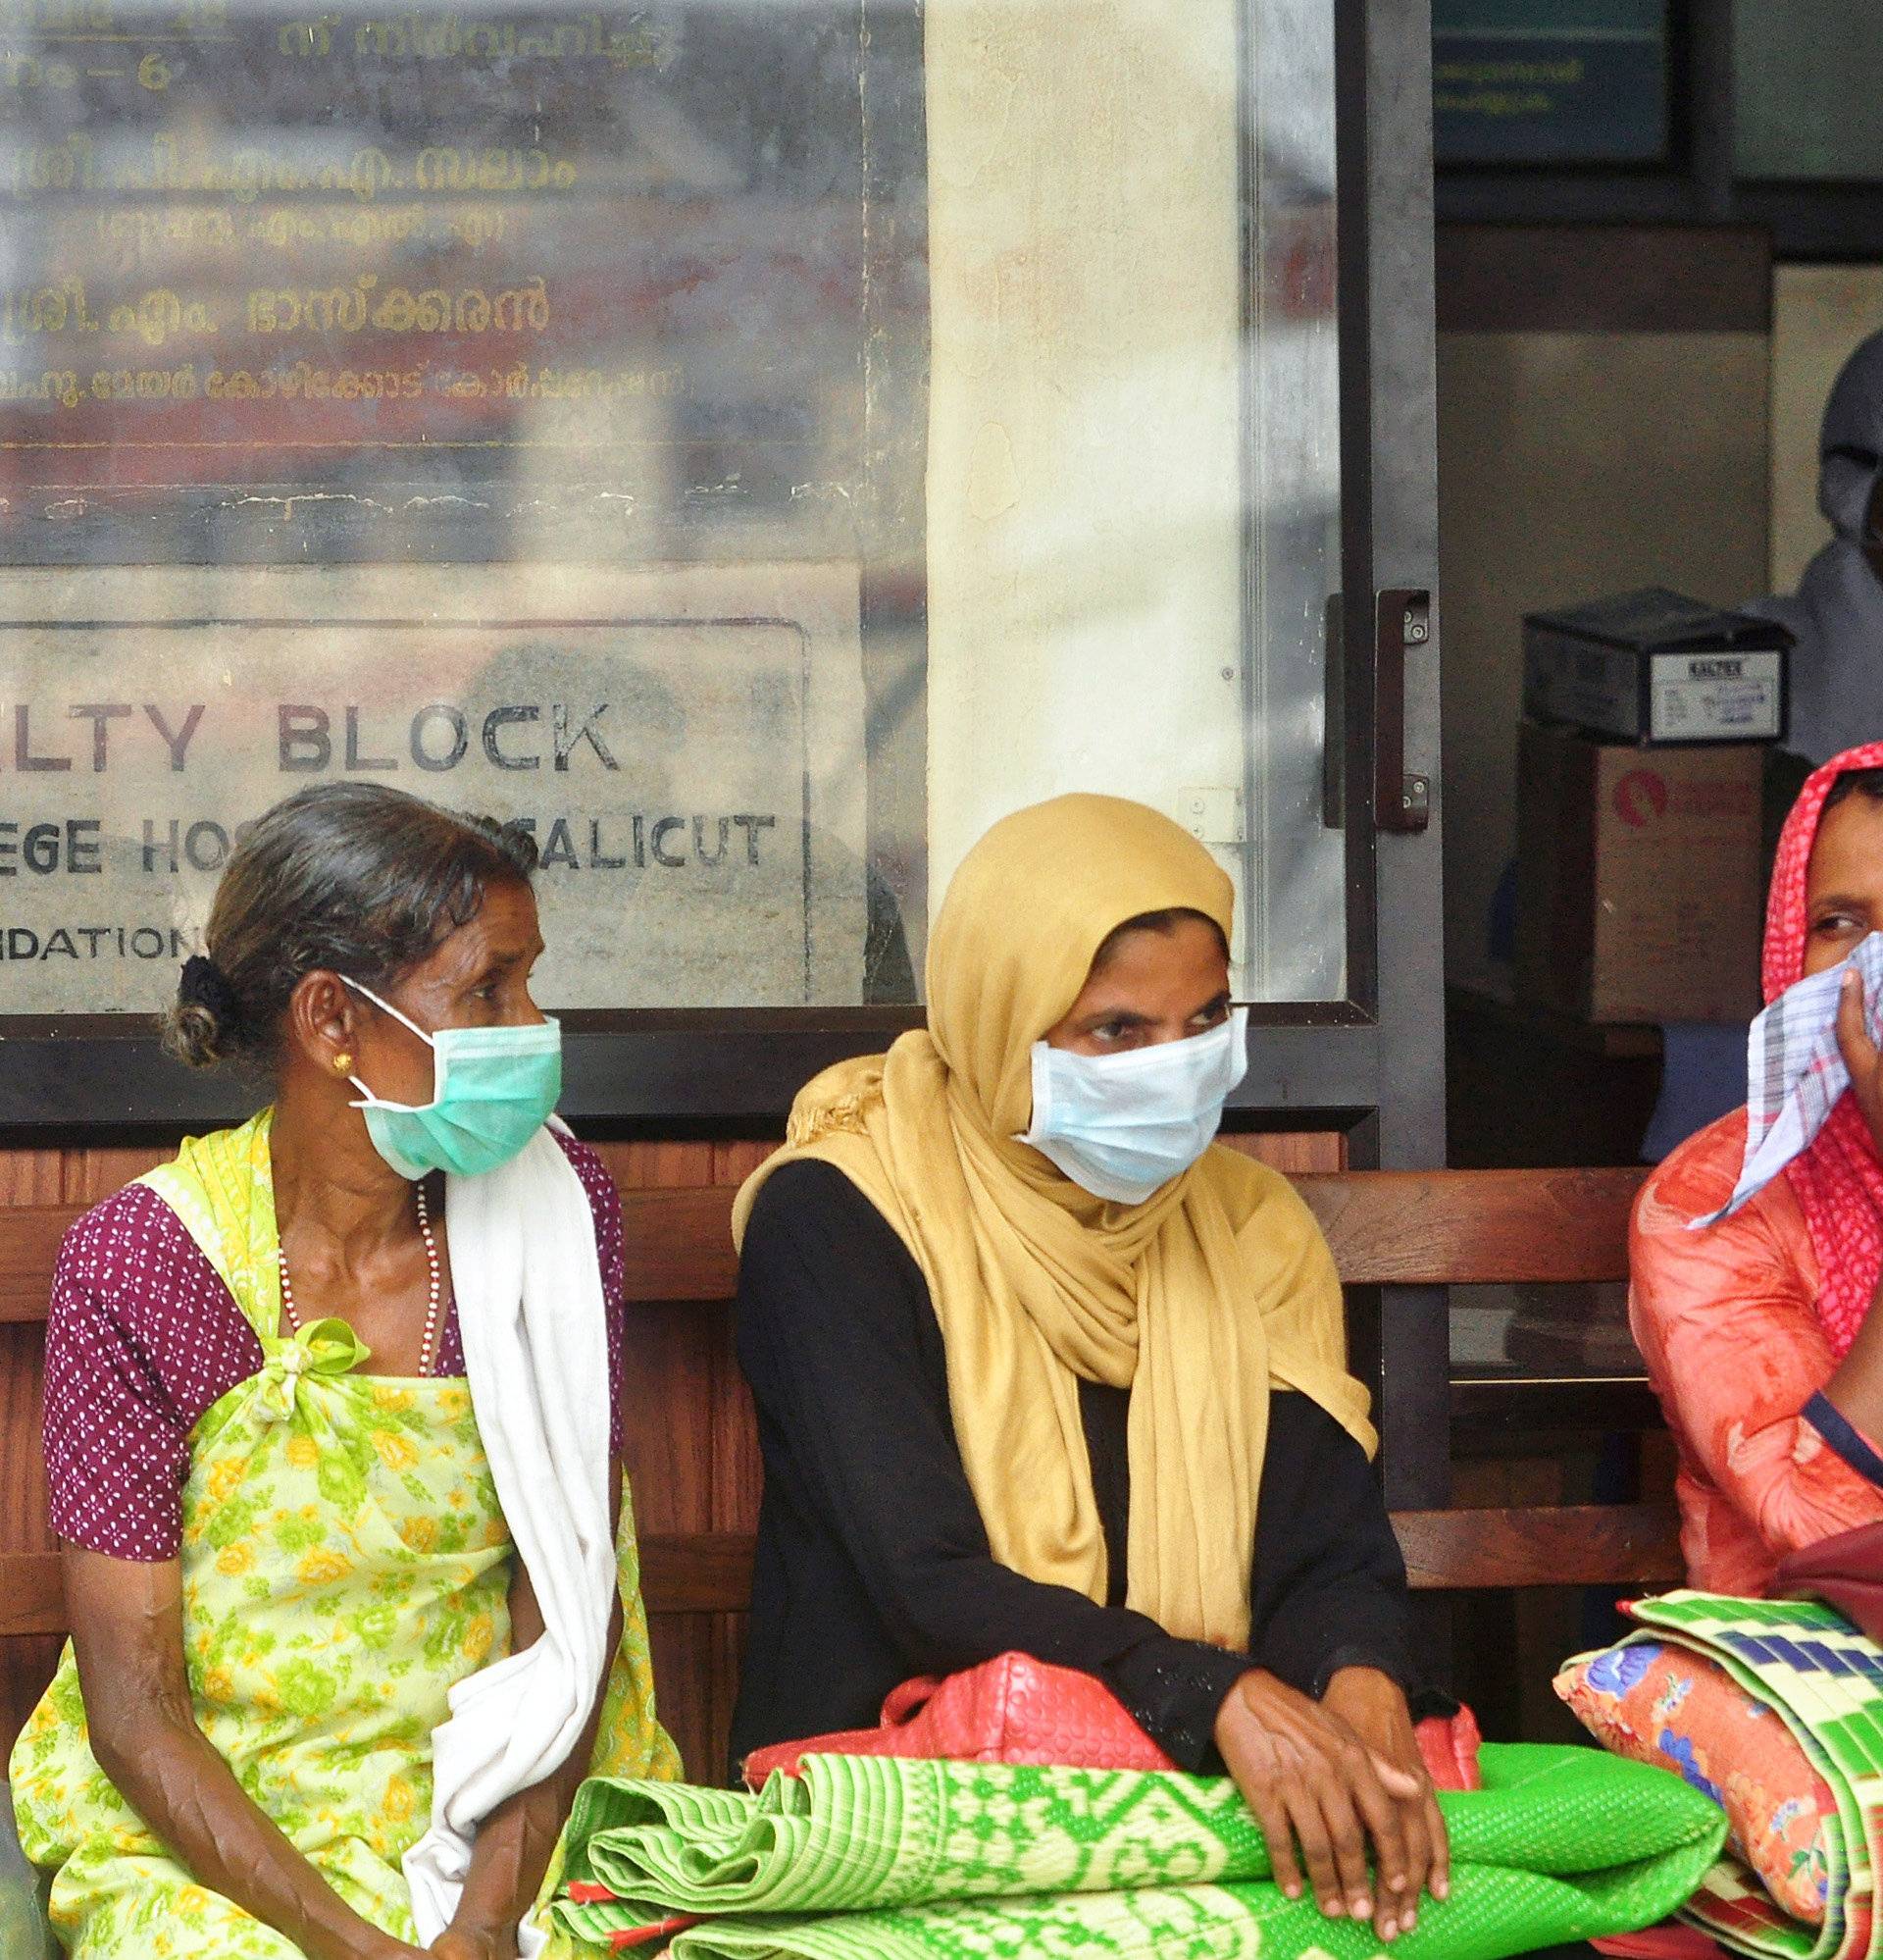 People wear masks as they wait outside a casualty ward at a hospital in Kozhikode